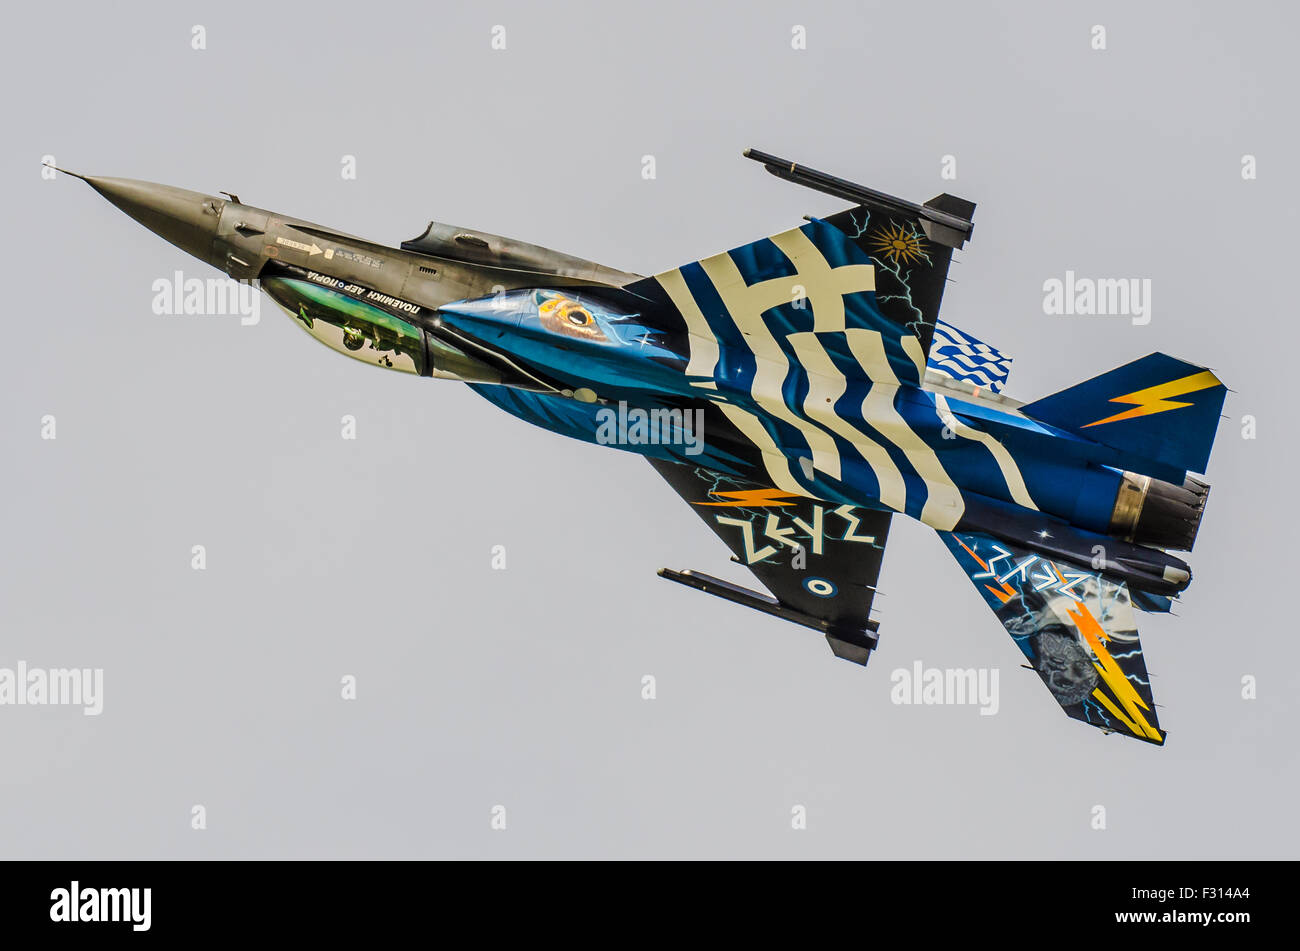 Greek General Dynamics F-16 fighter jet plane flying display aircraft with special paint scheme and known as 'Zeus'. Hellenic Air Force HAF display Stock Photo